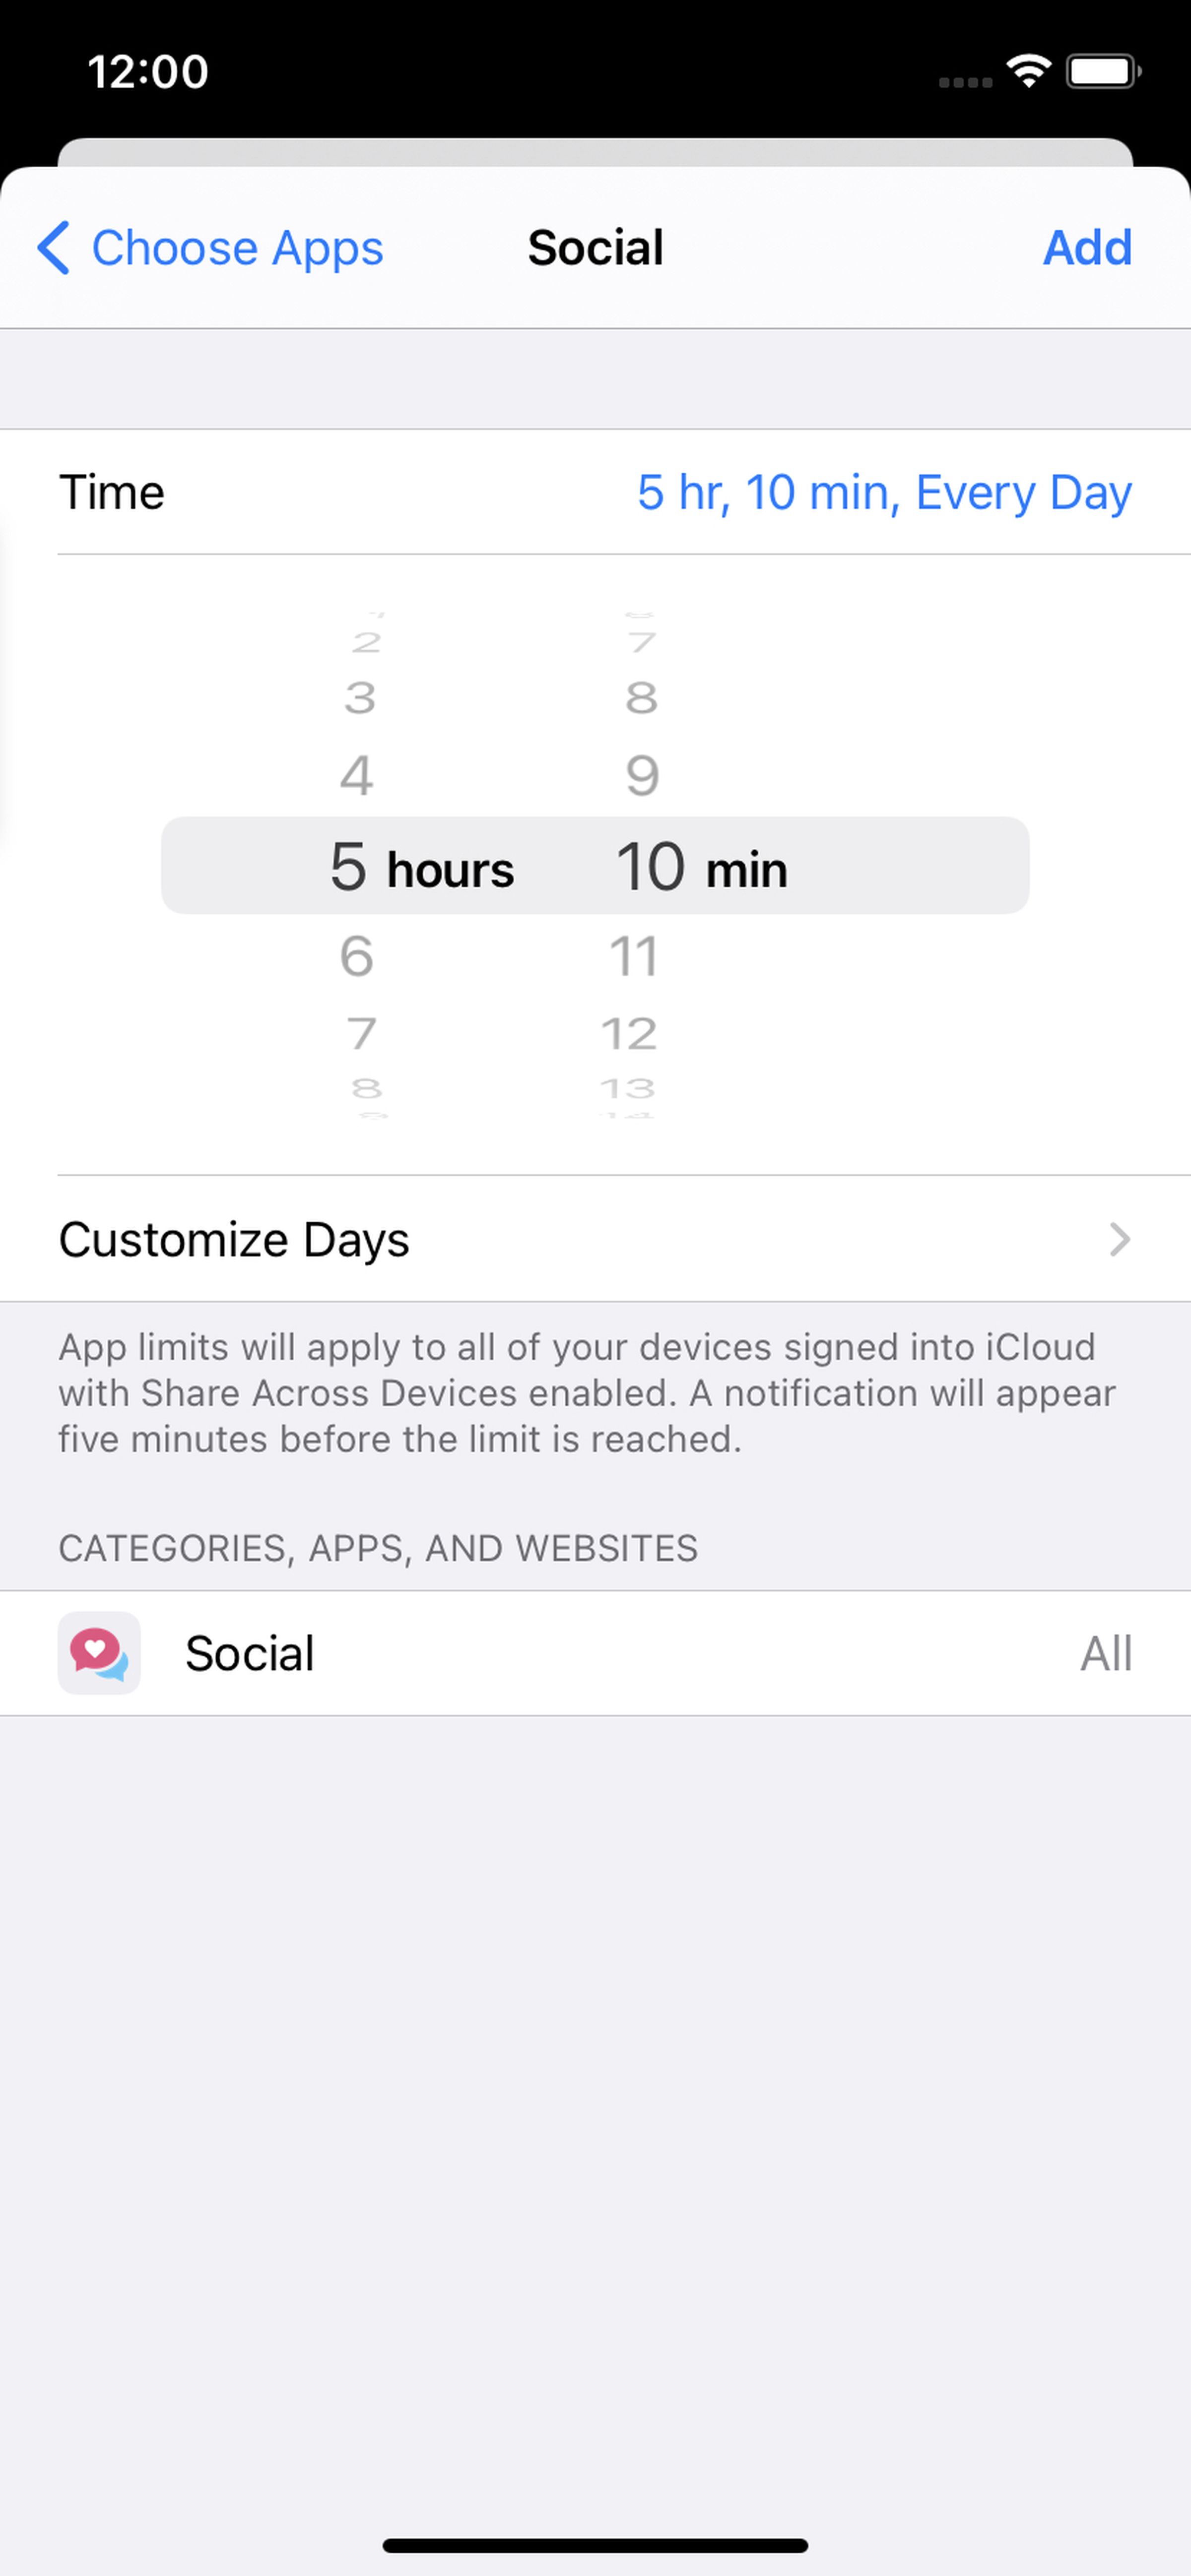 Choose how much time you want to spend on an app